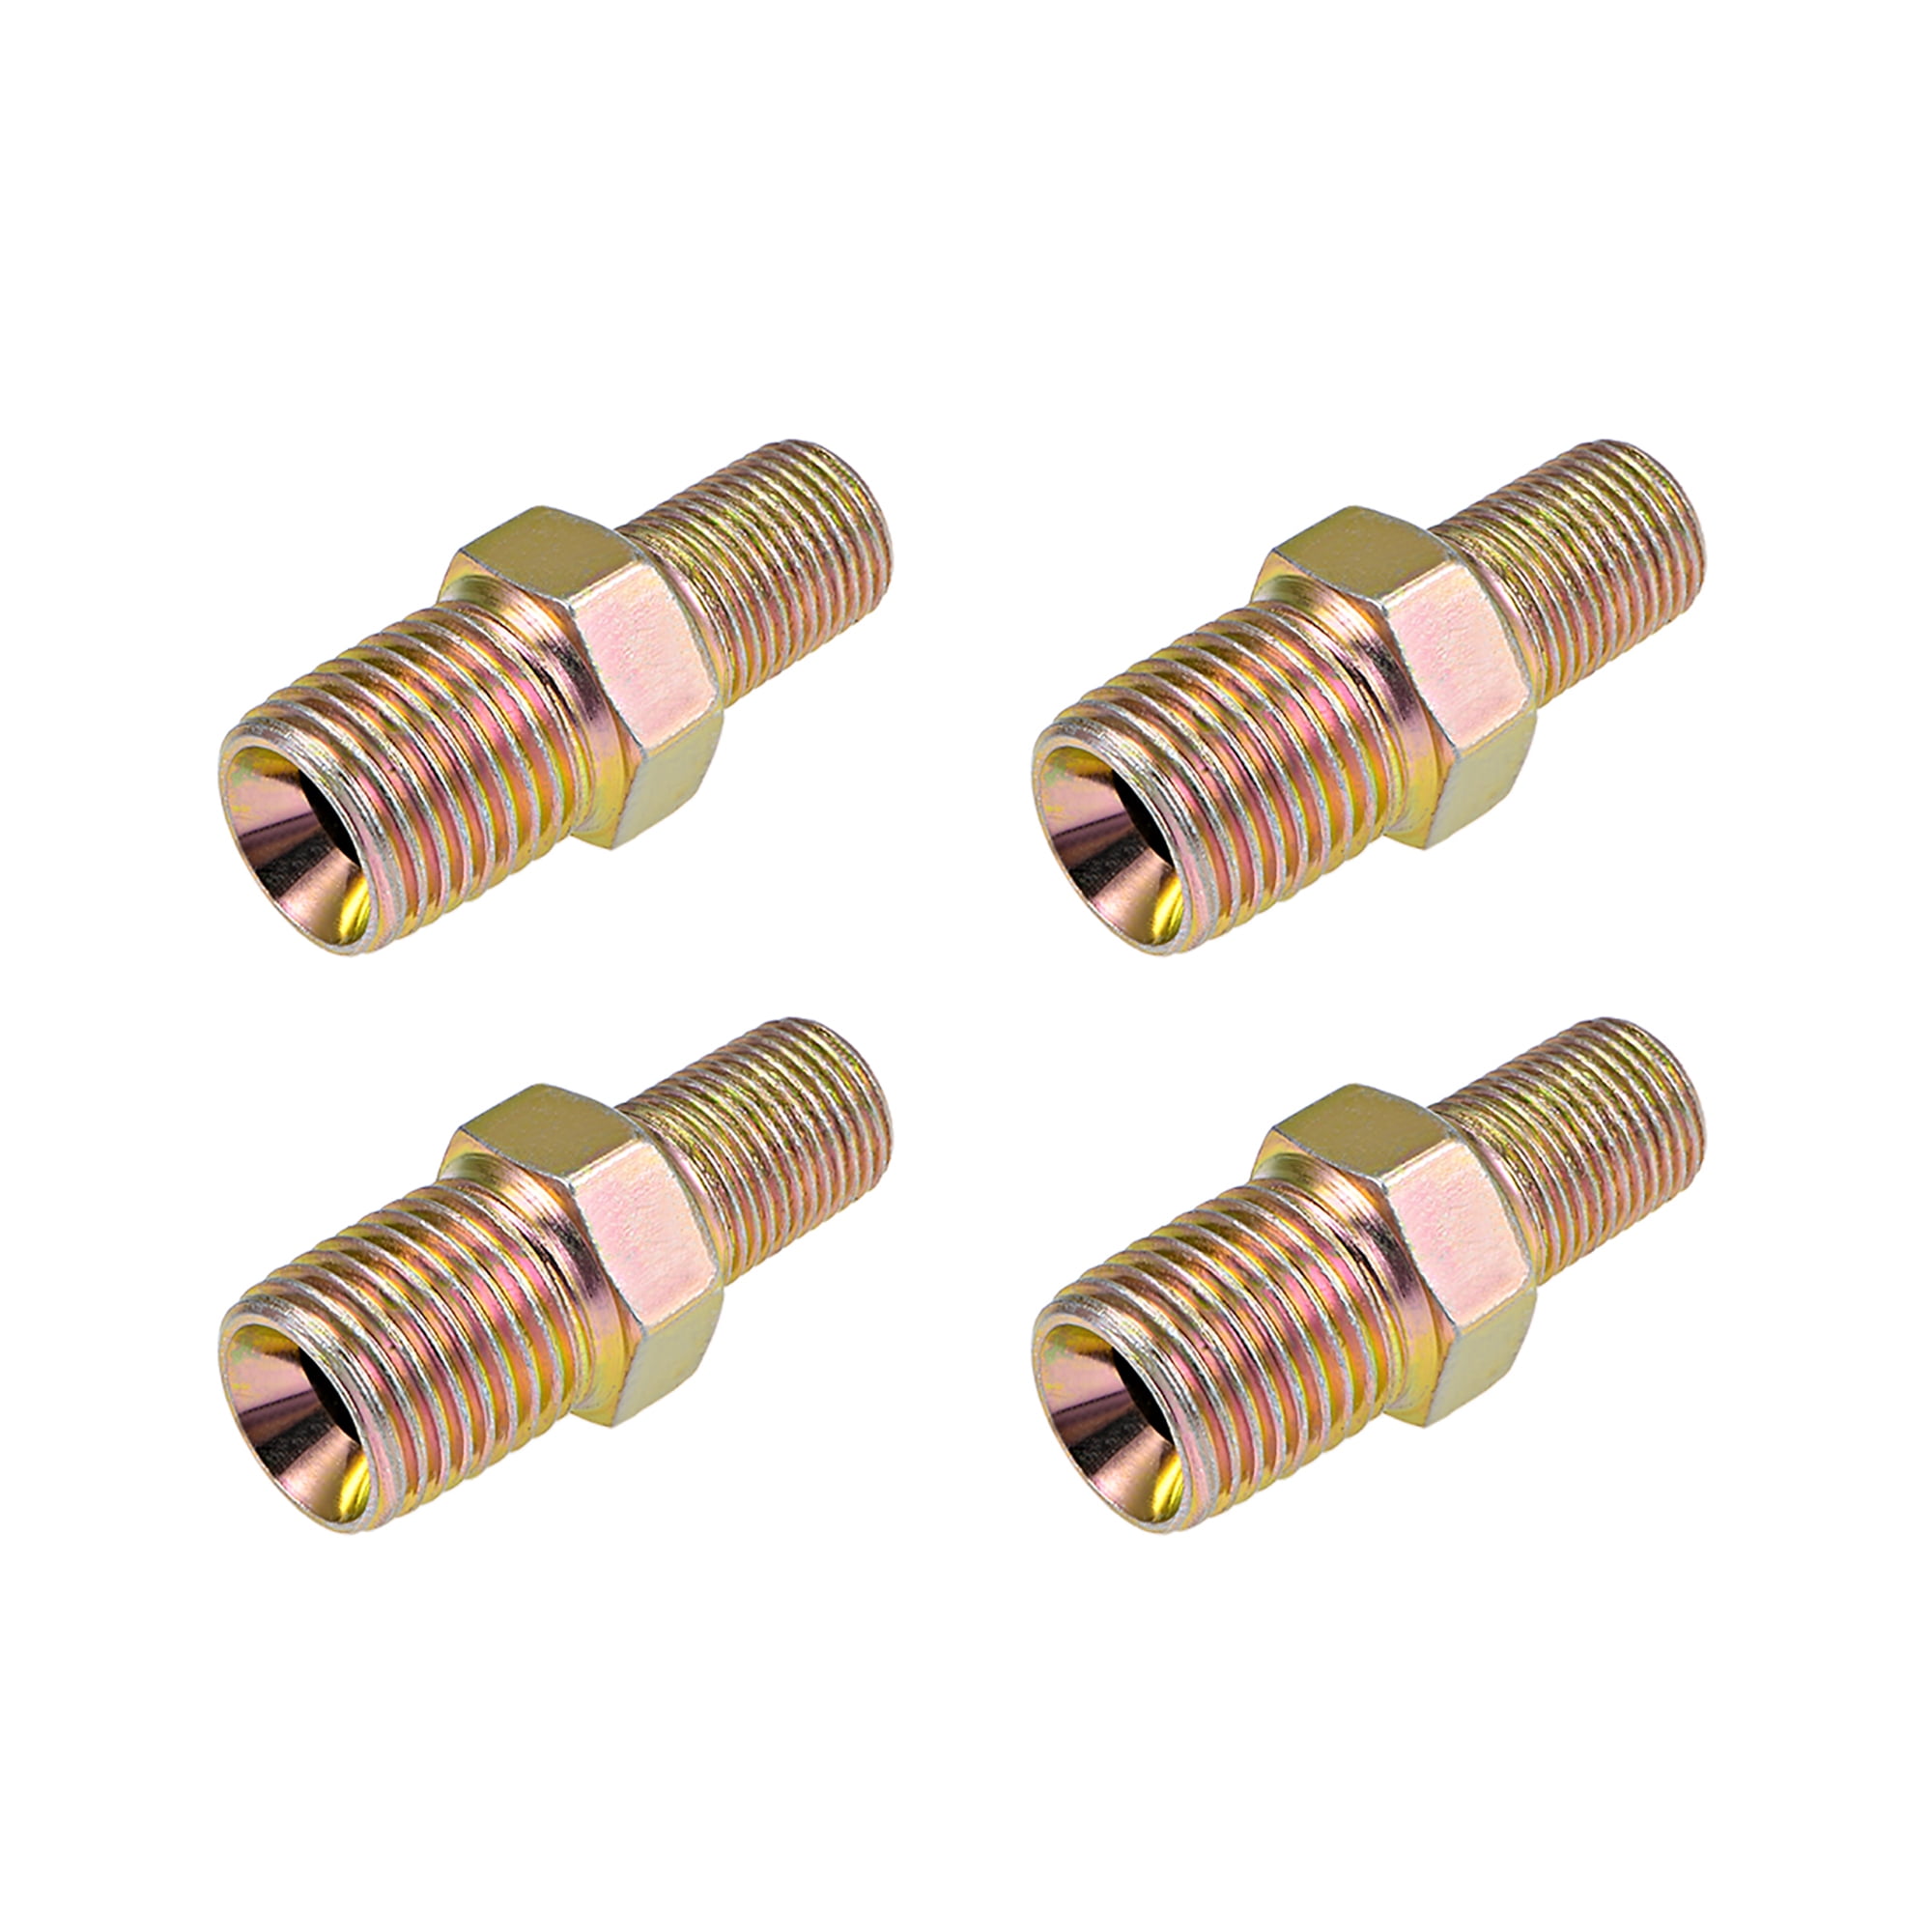 1/4BSP Male Thread Brass Hex Nipple Tube Pipe Connecting Fittings 4pcs 